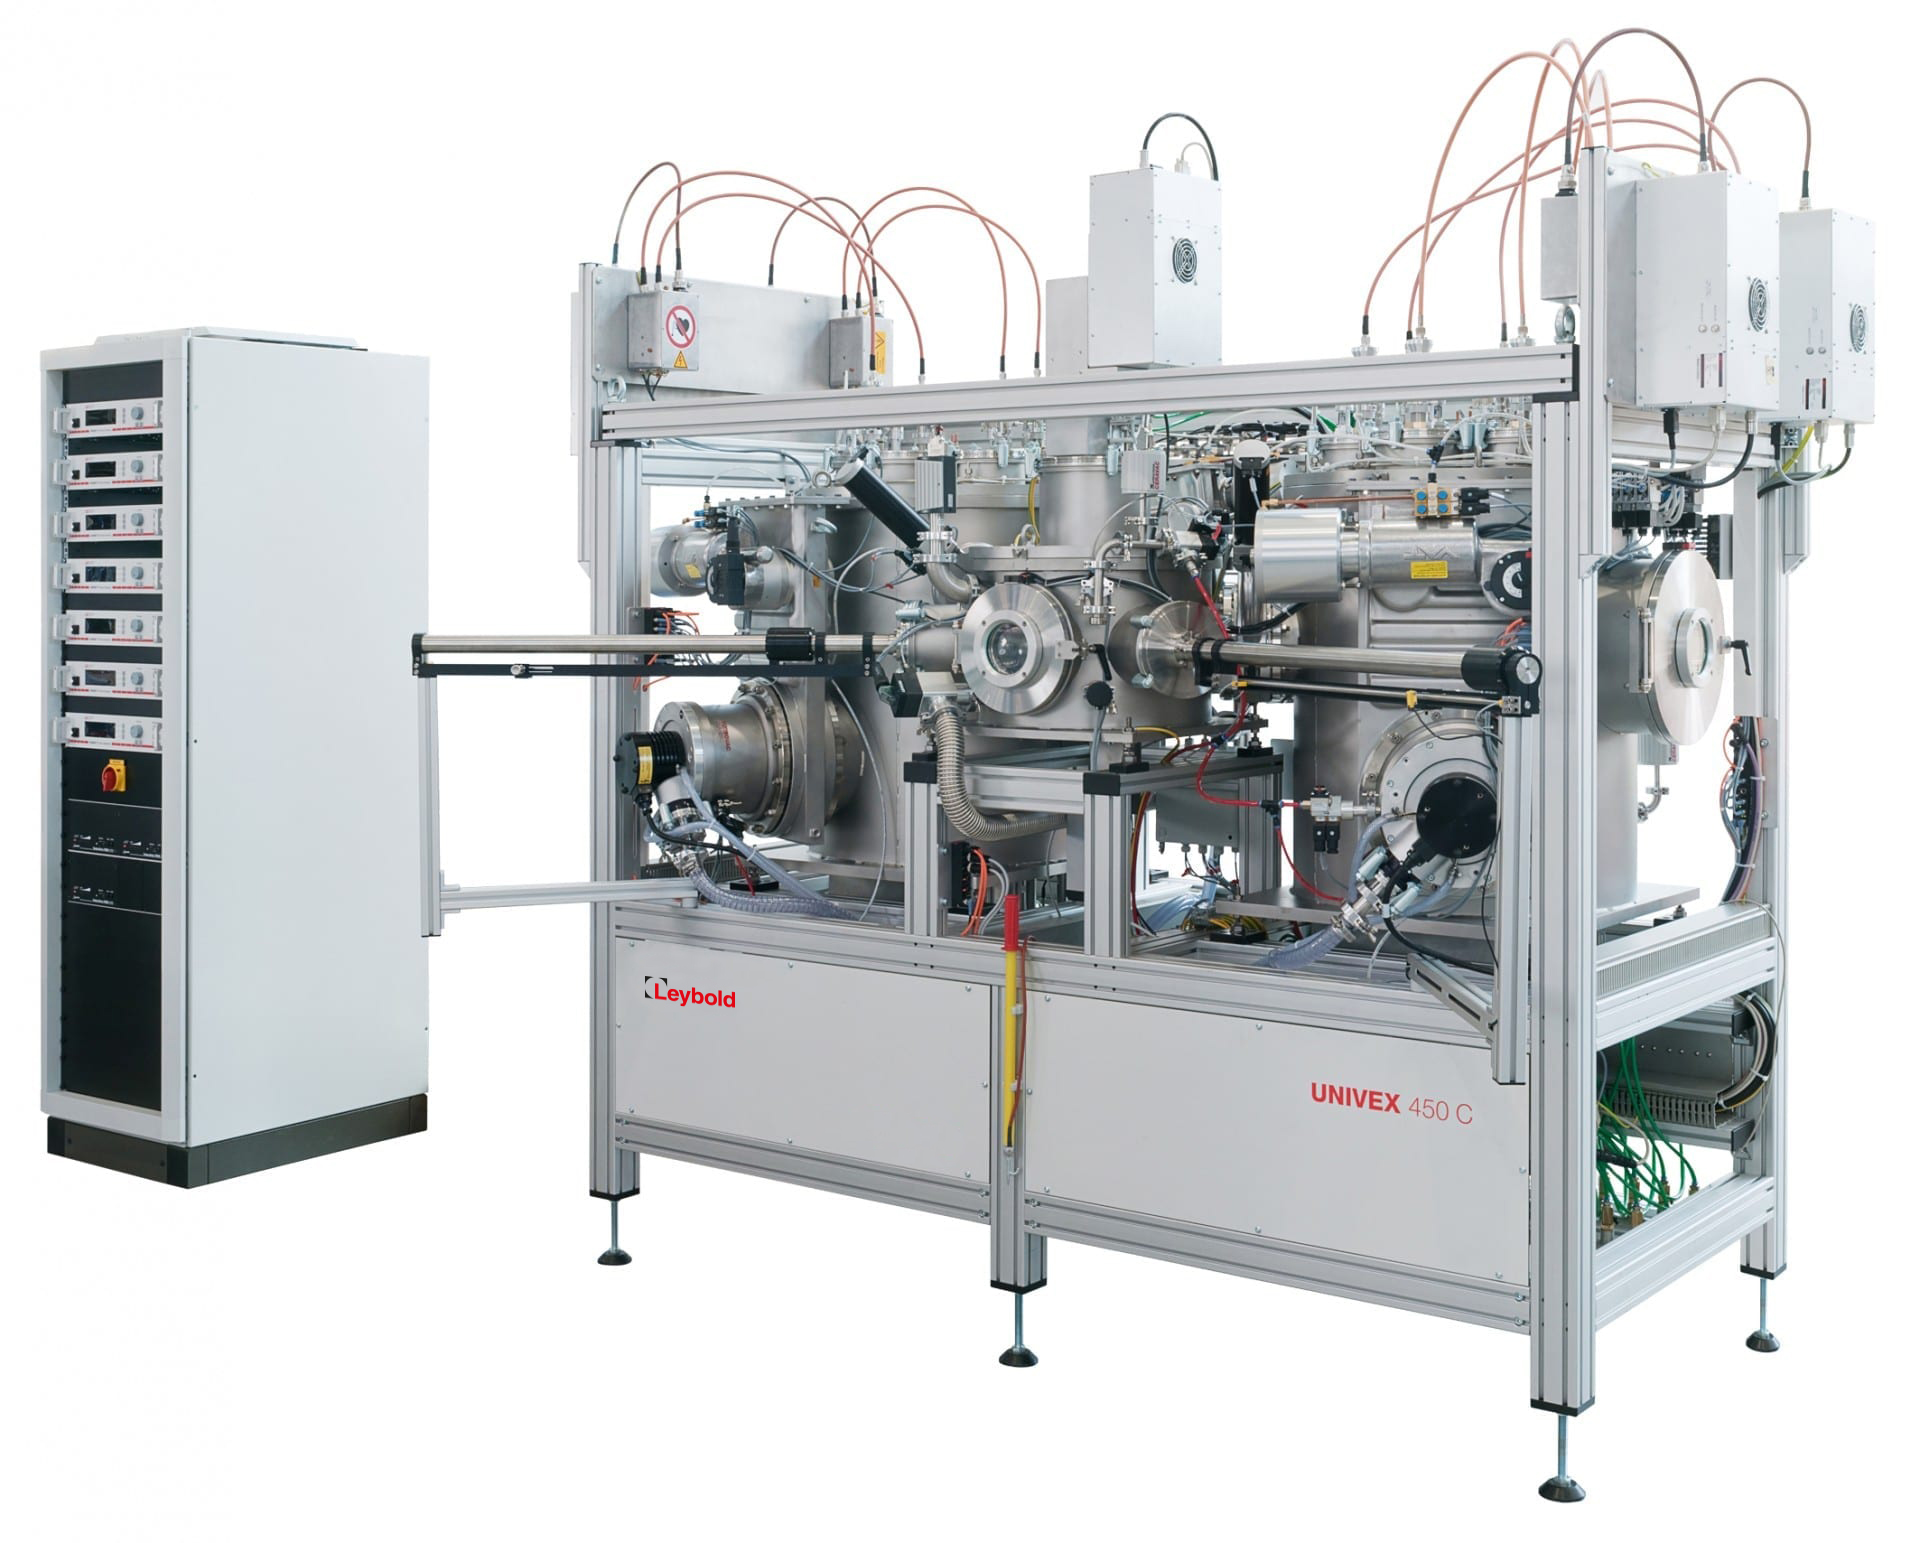 Figure 2 - UNIVEX thin film depostion system cluster tool automates sequence of several types of PVD coating processes for research, pilot and production. (Courtesy: Leybold USA Inc.)